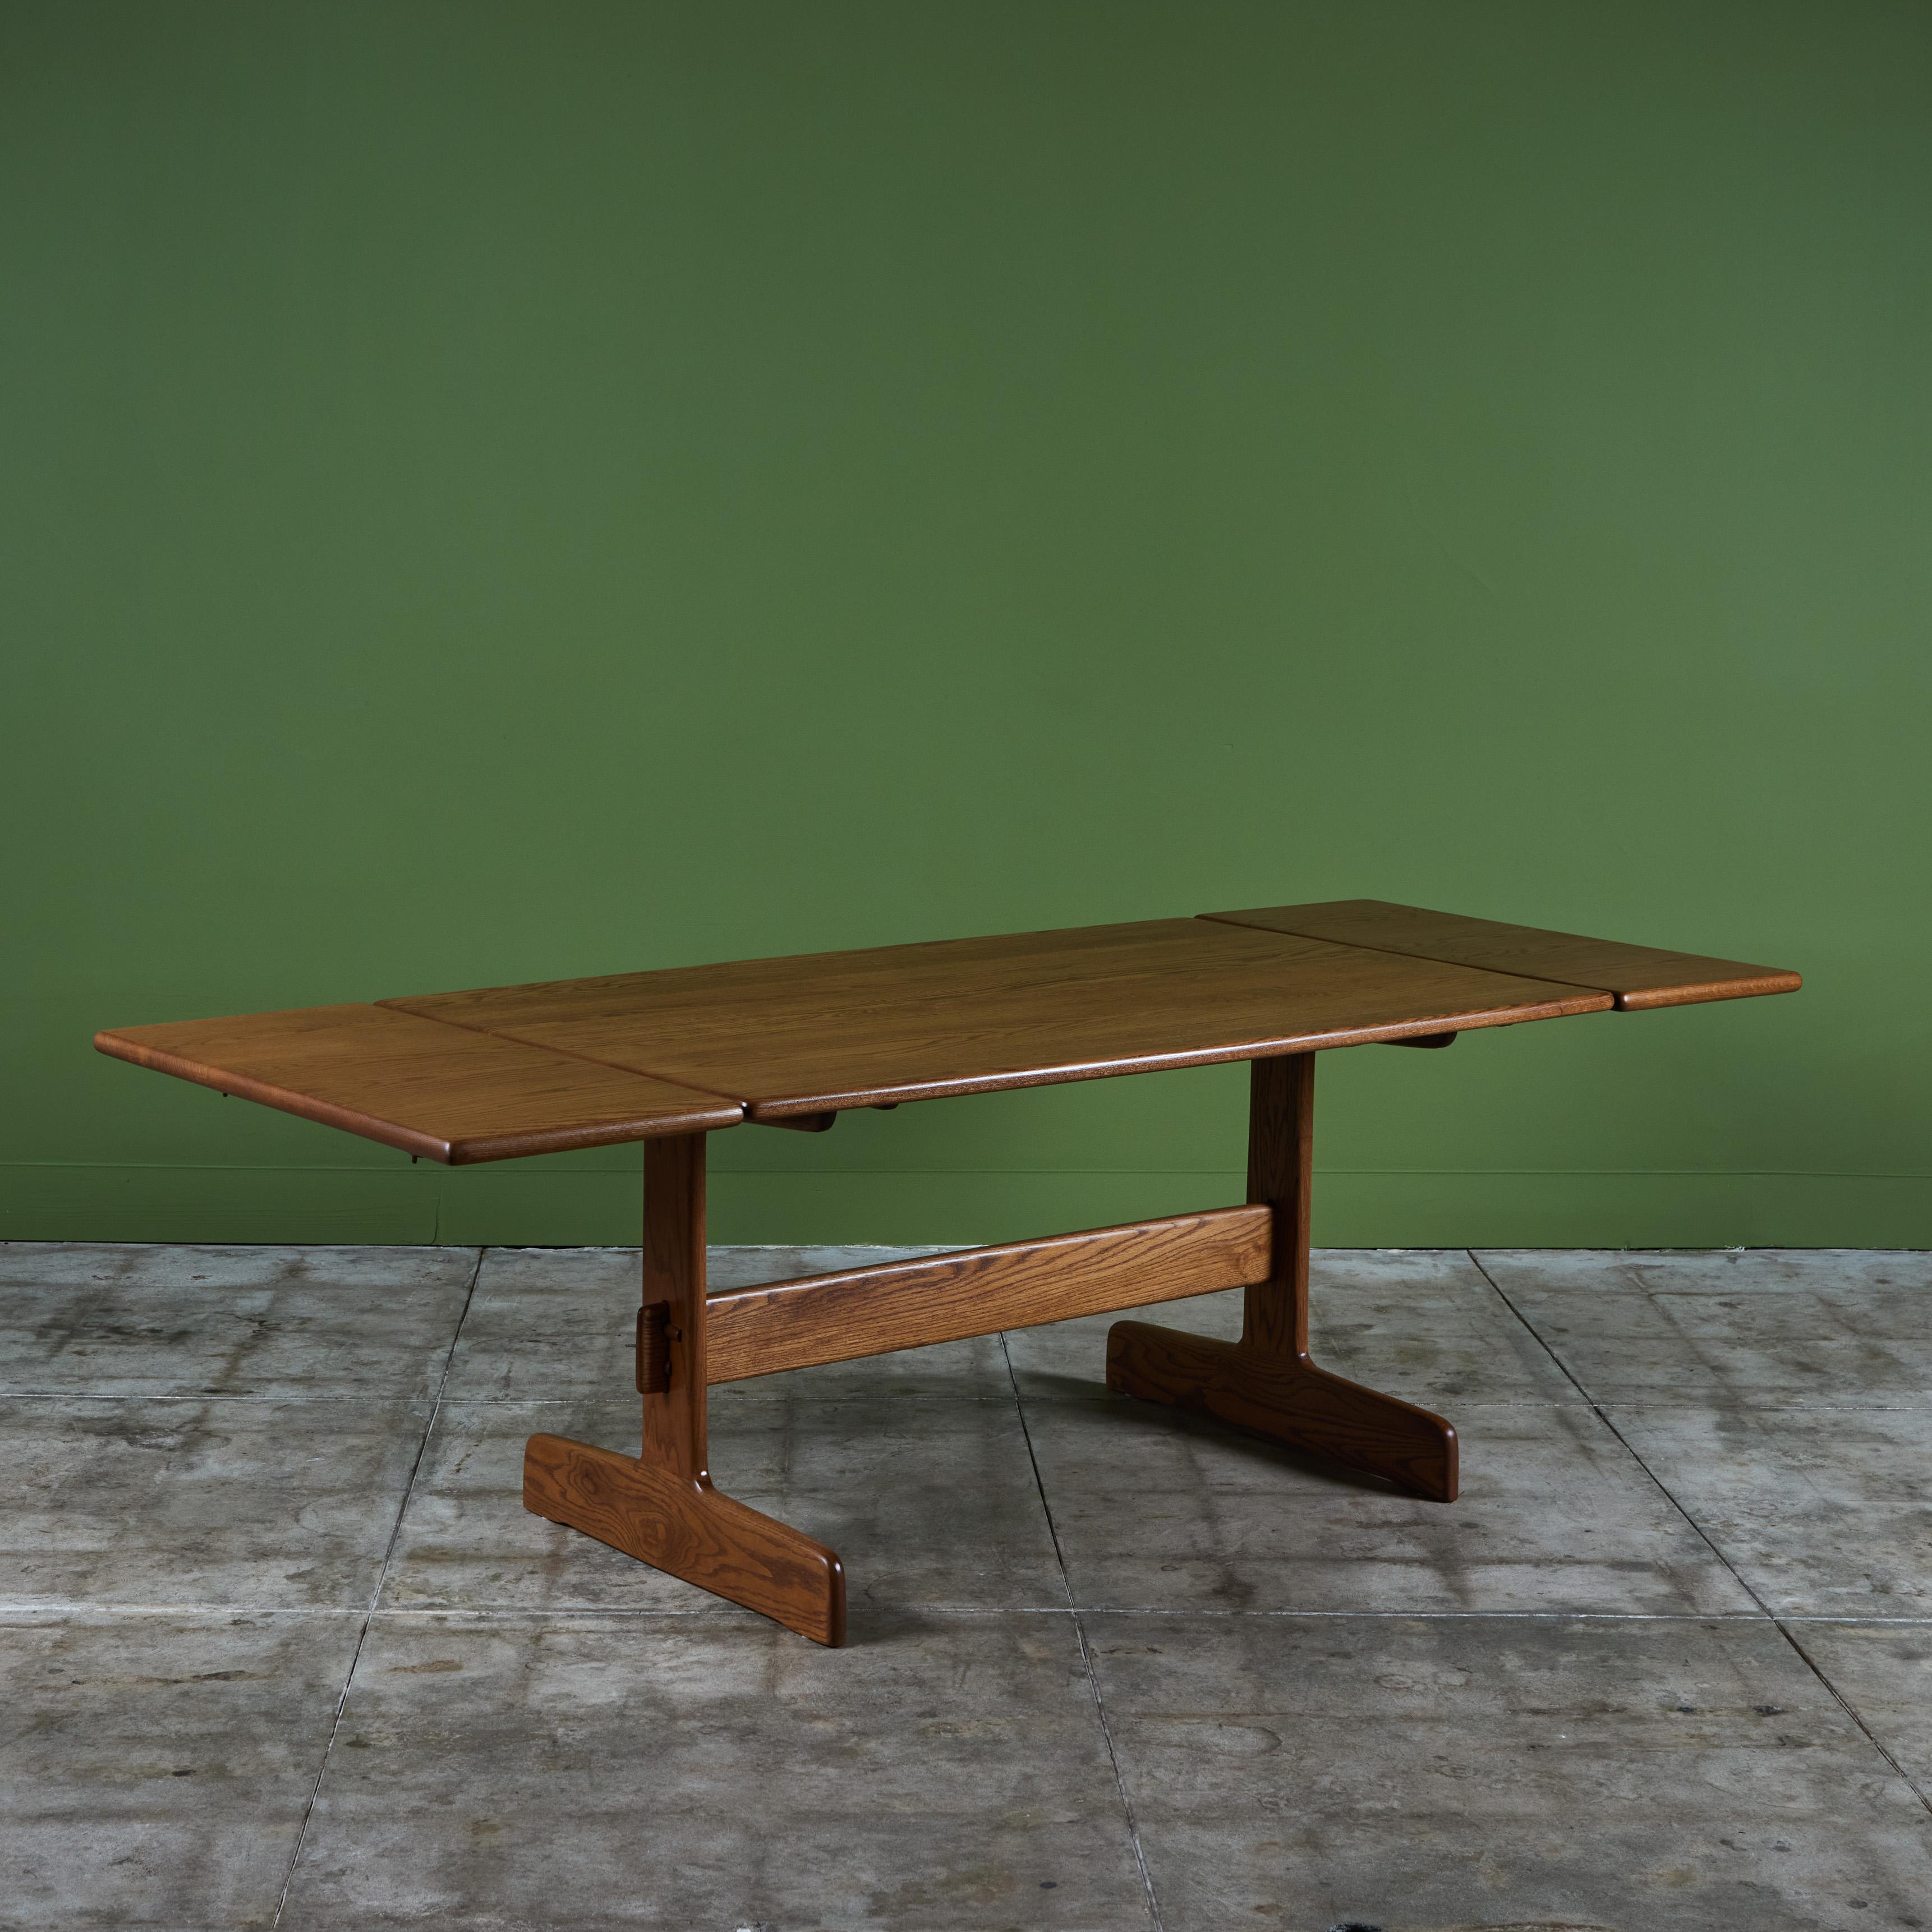 Oak dining table from American designer Gerald McCabe for Eon Furniture, c.1970s. The solid wood table has two leaves which attach on either end of the table. The table looks beautiful paired with the available Gerald McCabe Trestle